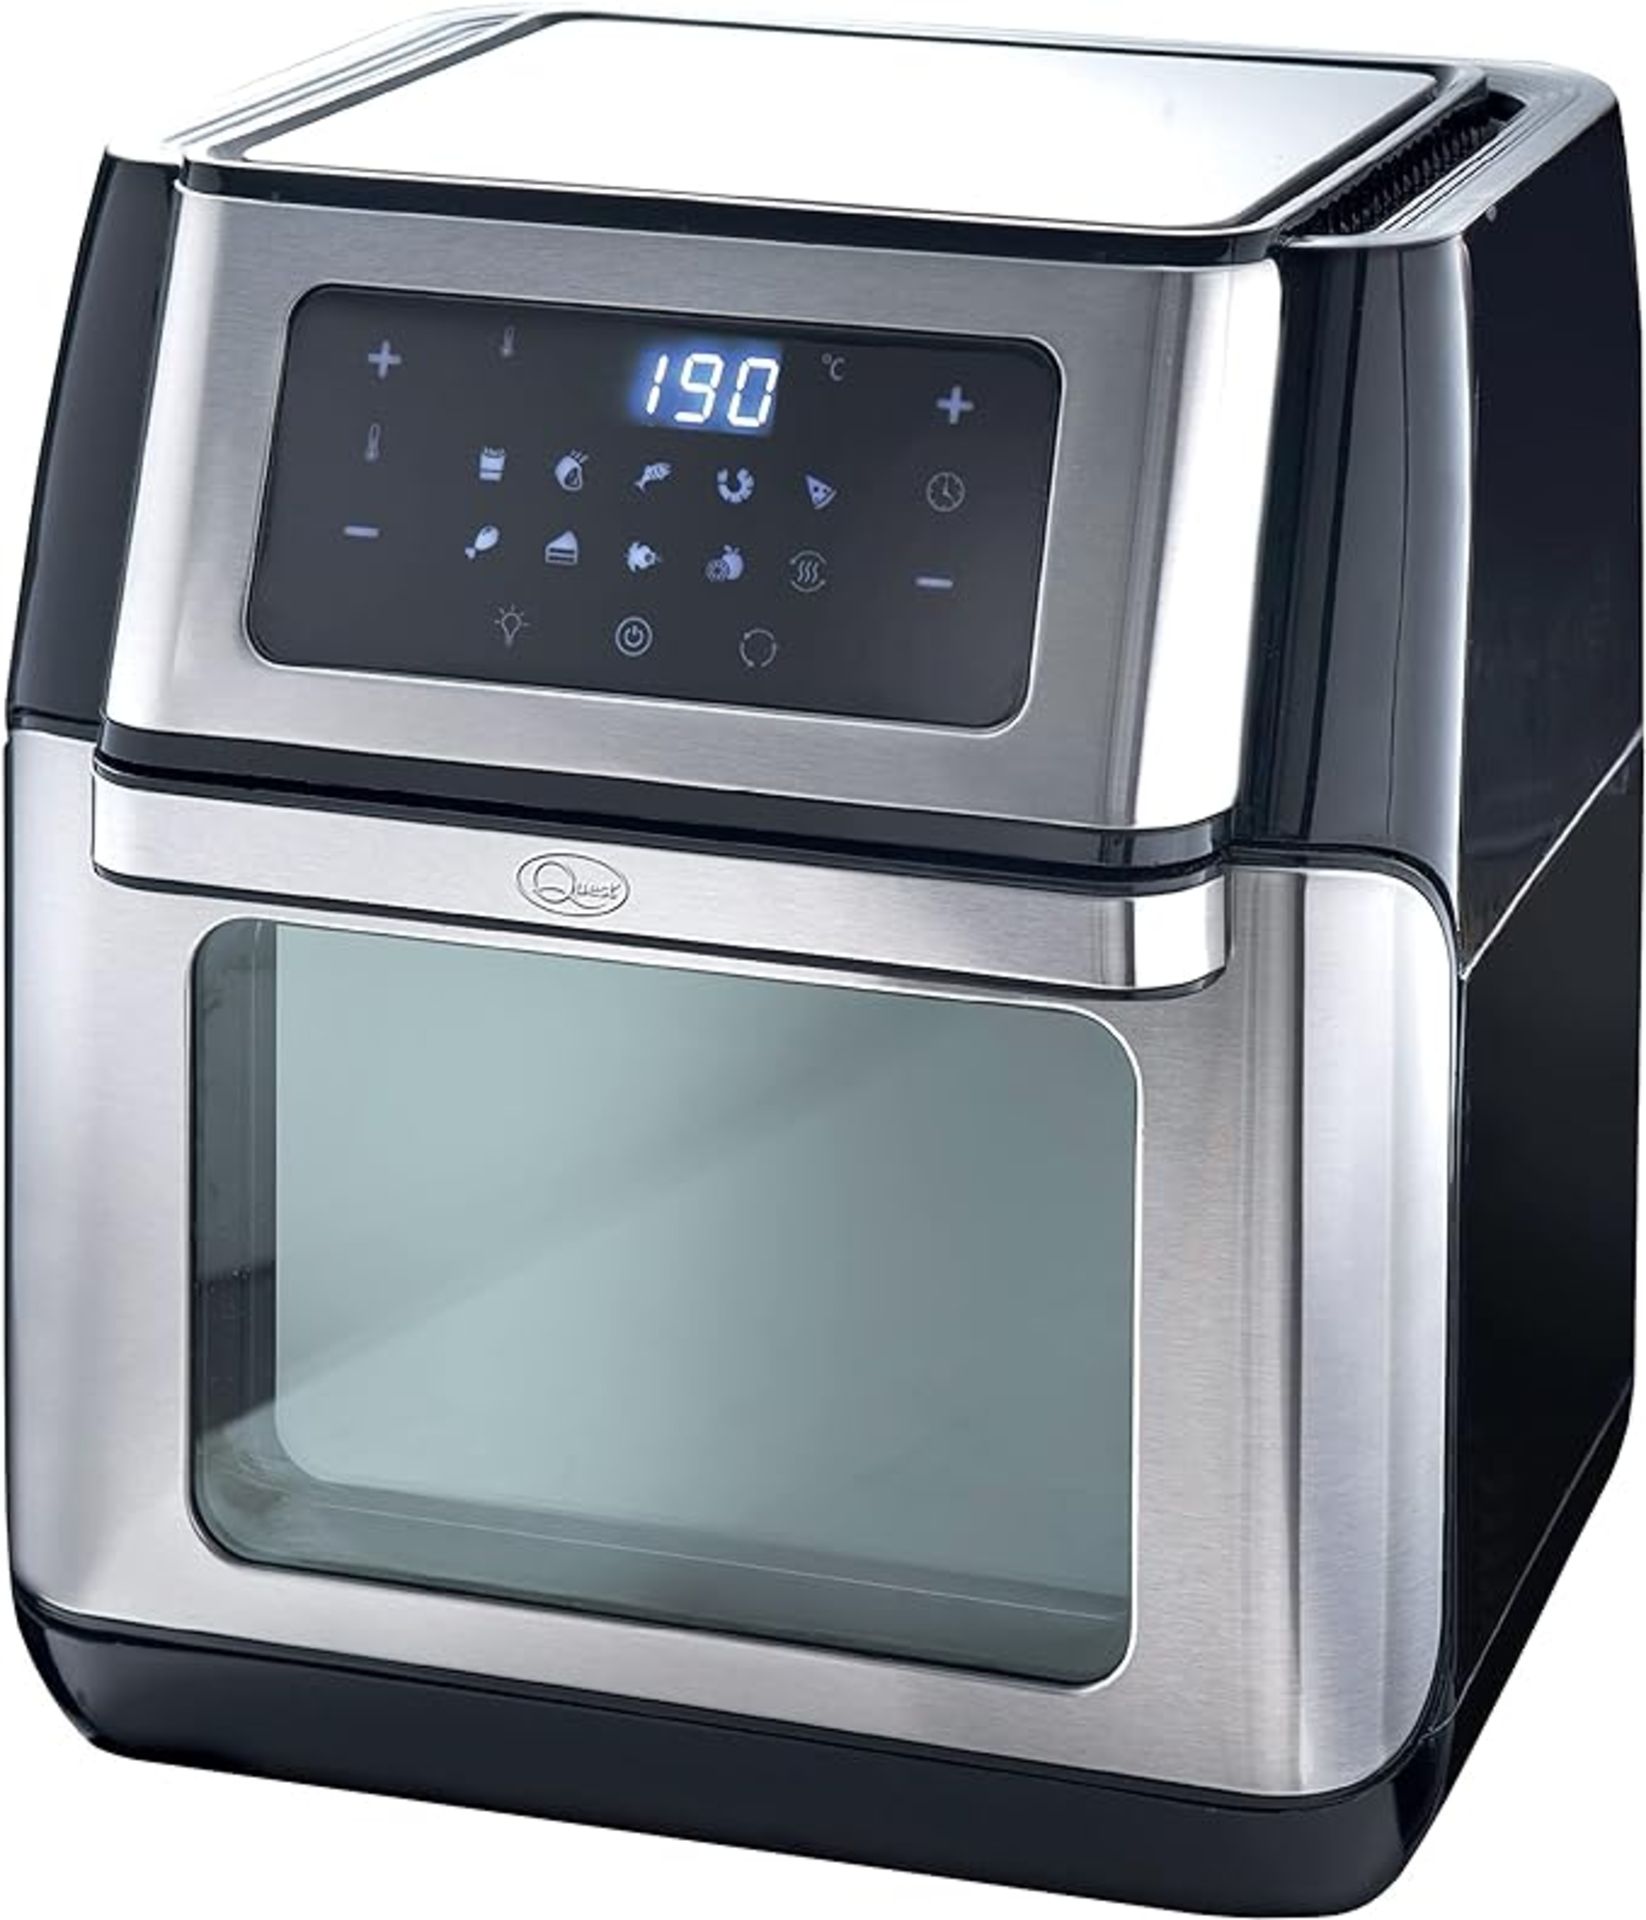 Trade lot 4 x Quest 12L Digital Air Fryer Oven/Large Family Size / 5 in 1/ 10 Pre-Set Modes /